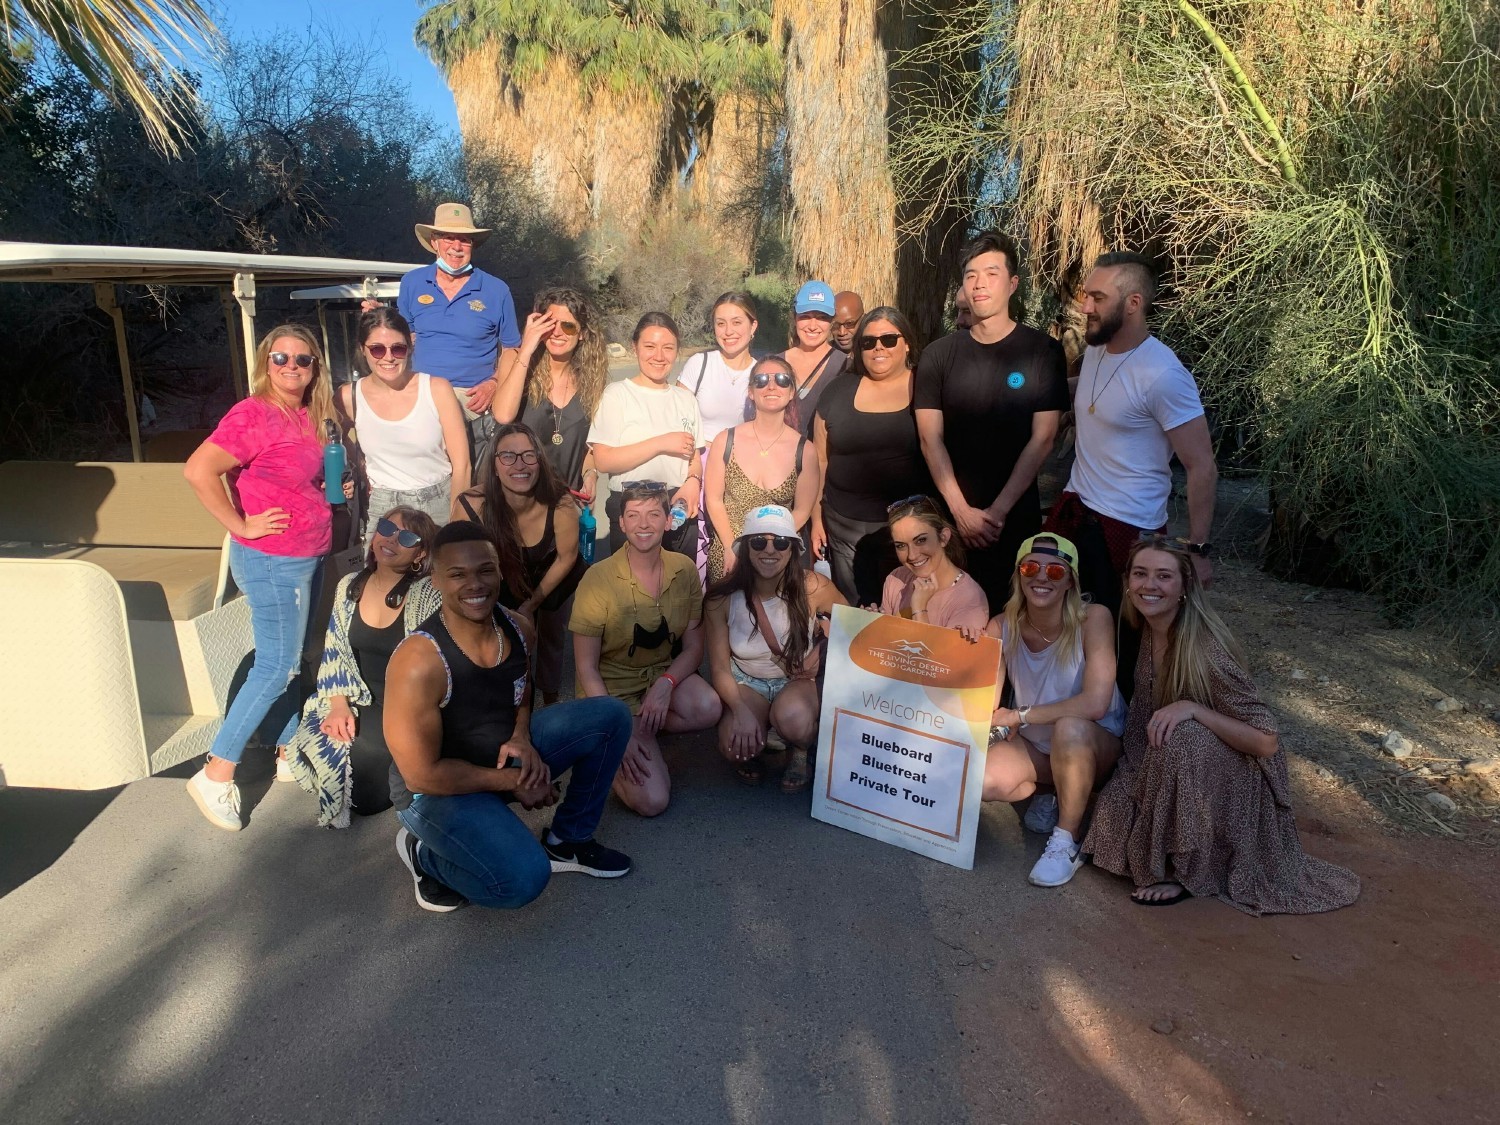 Our team enjoying a private tour of the Living Desert in Palm Springs, where they fed giraffes by hand! #blueboarding